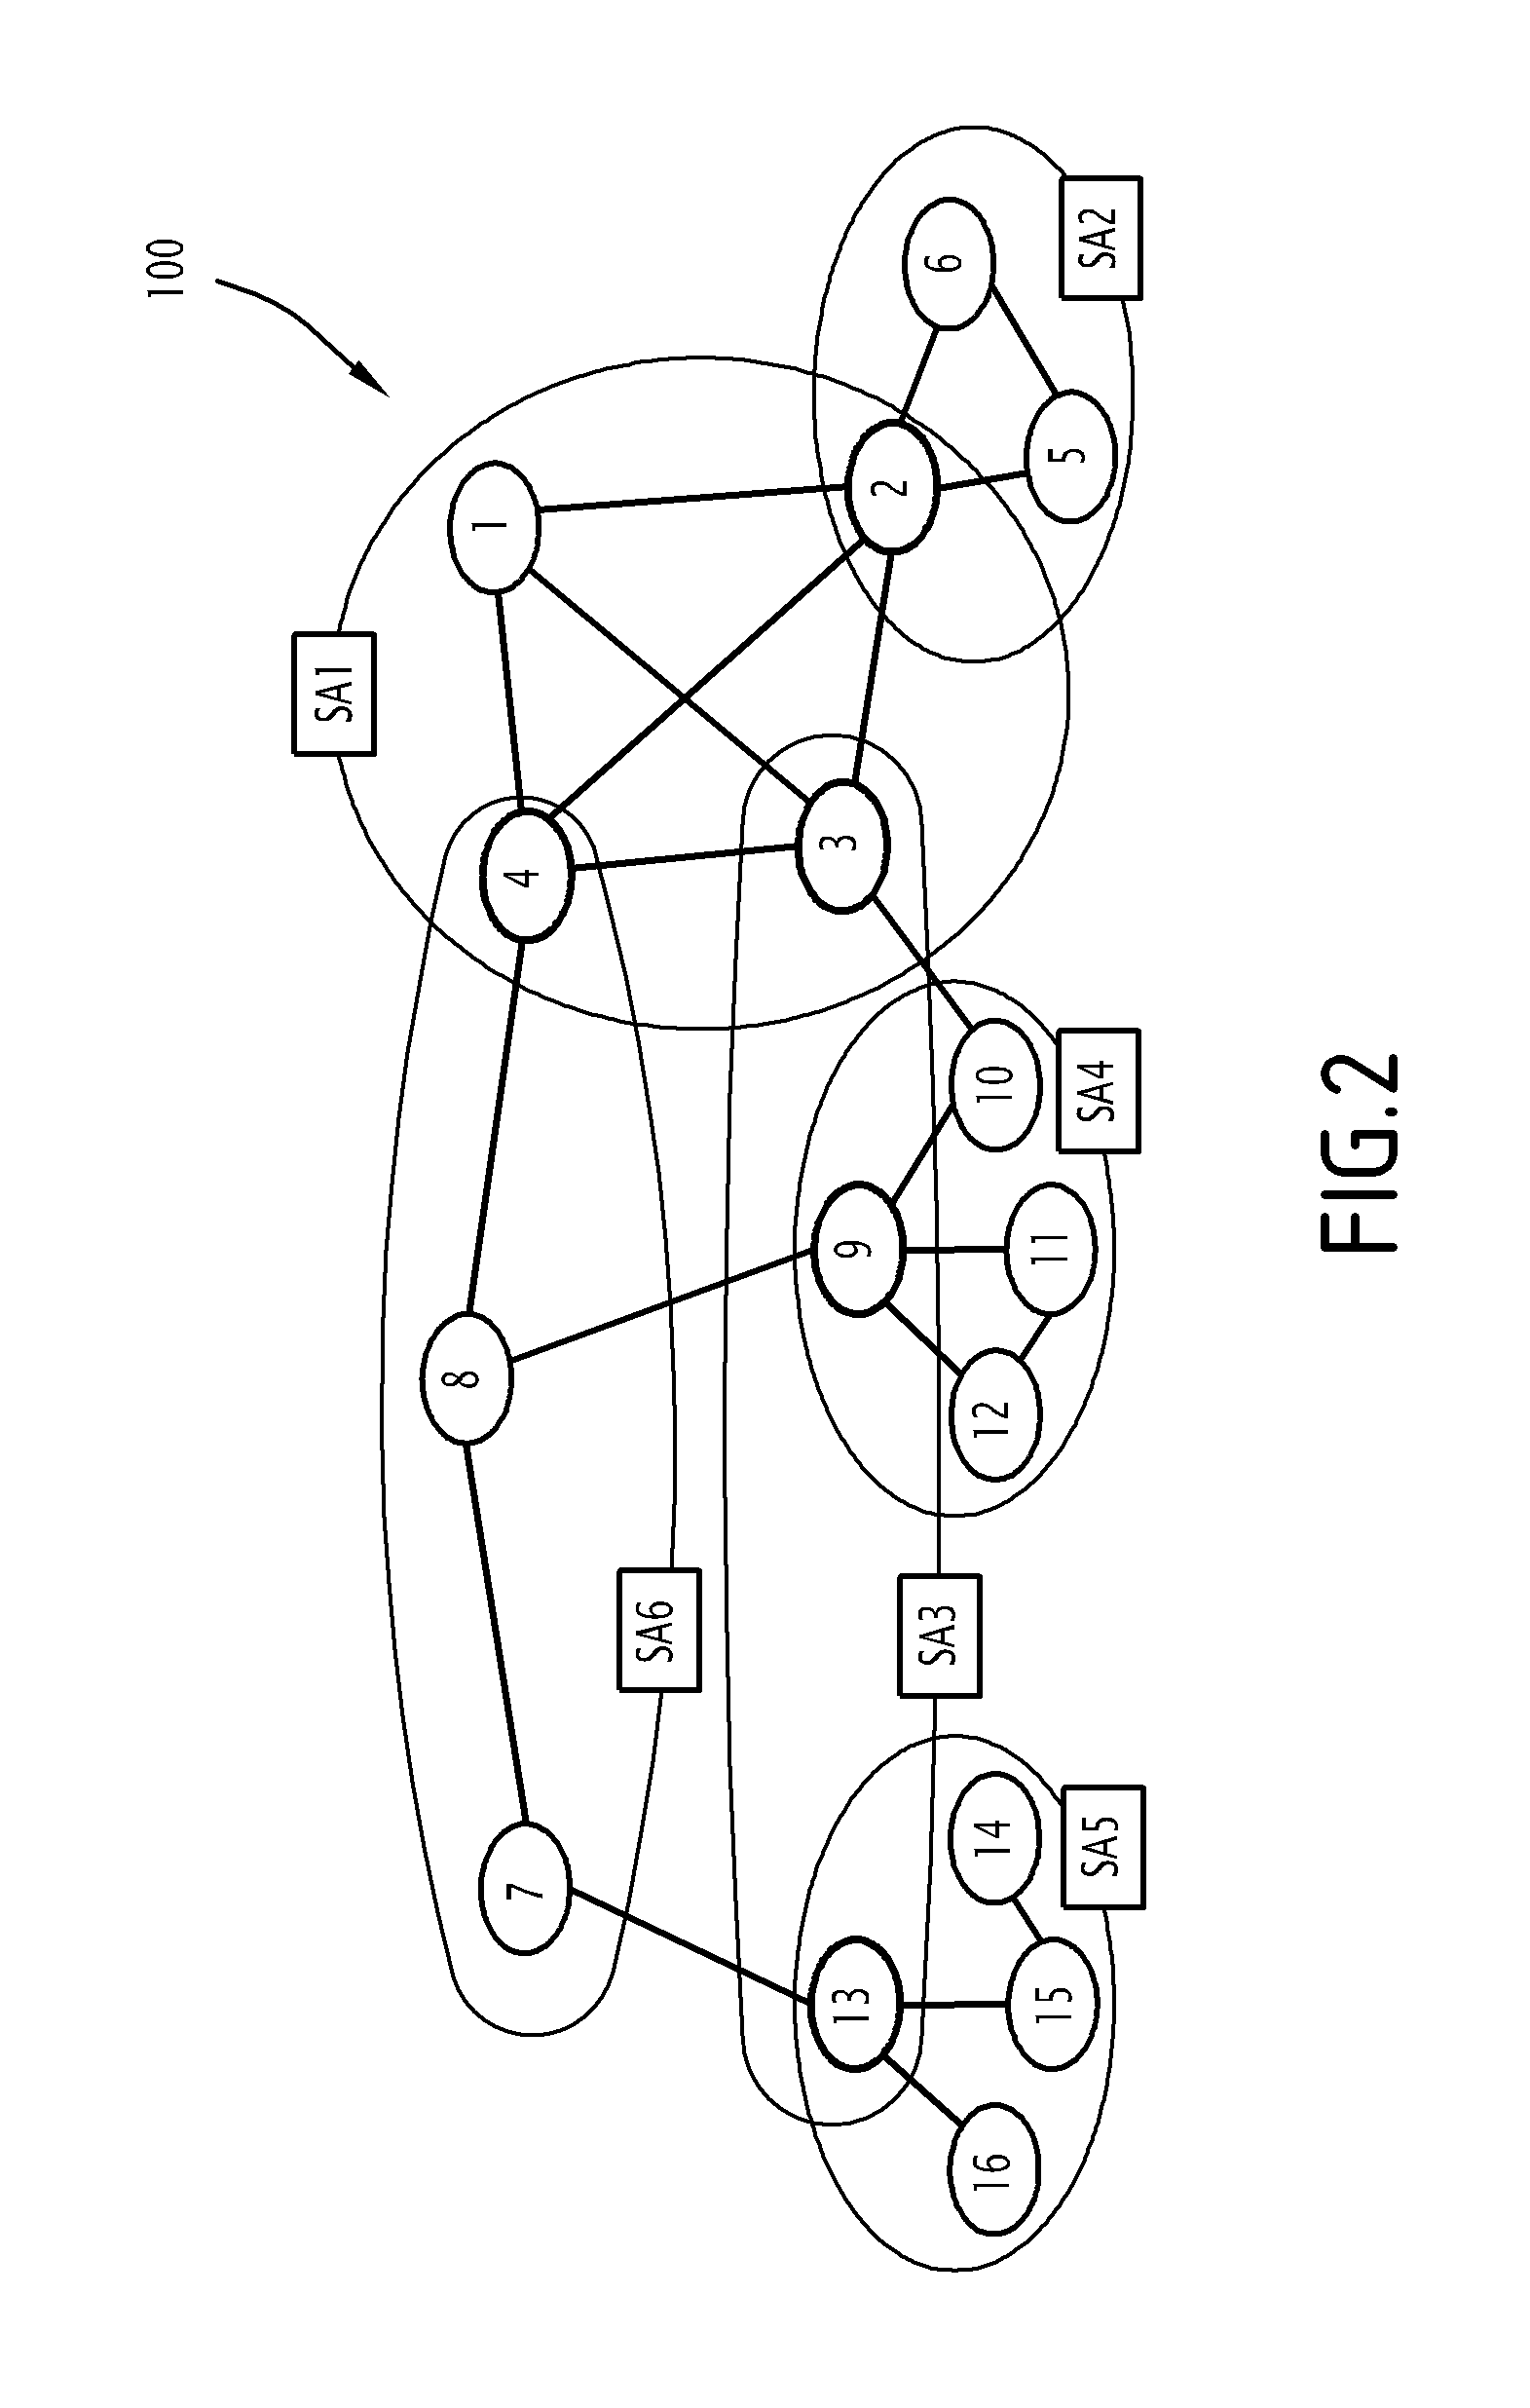 Method for the secure exchange of data over an ad-hoc network implementing an Xcast broadcasting service and associated node